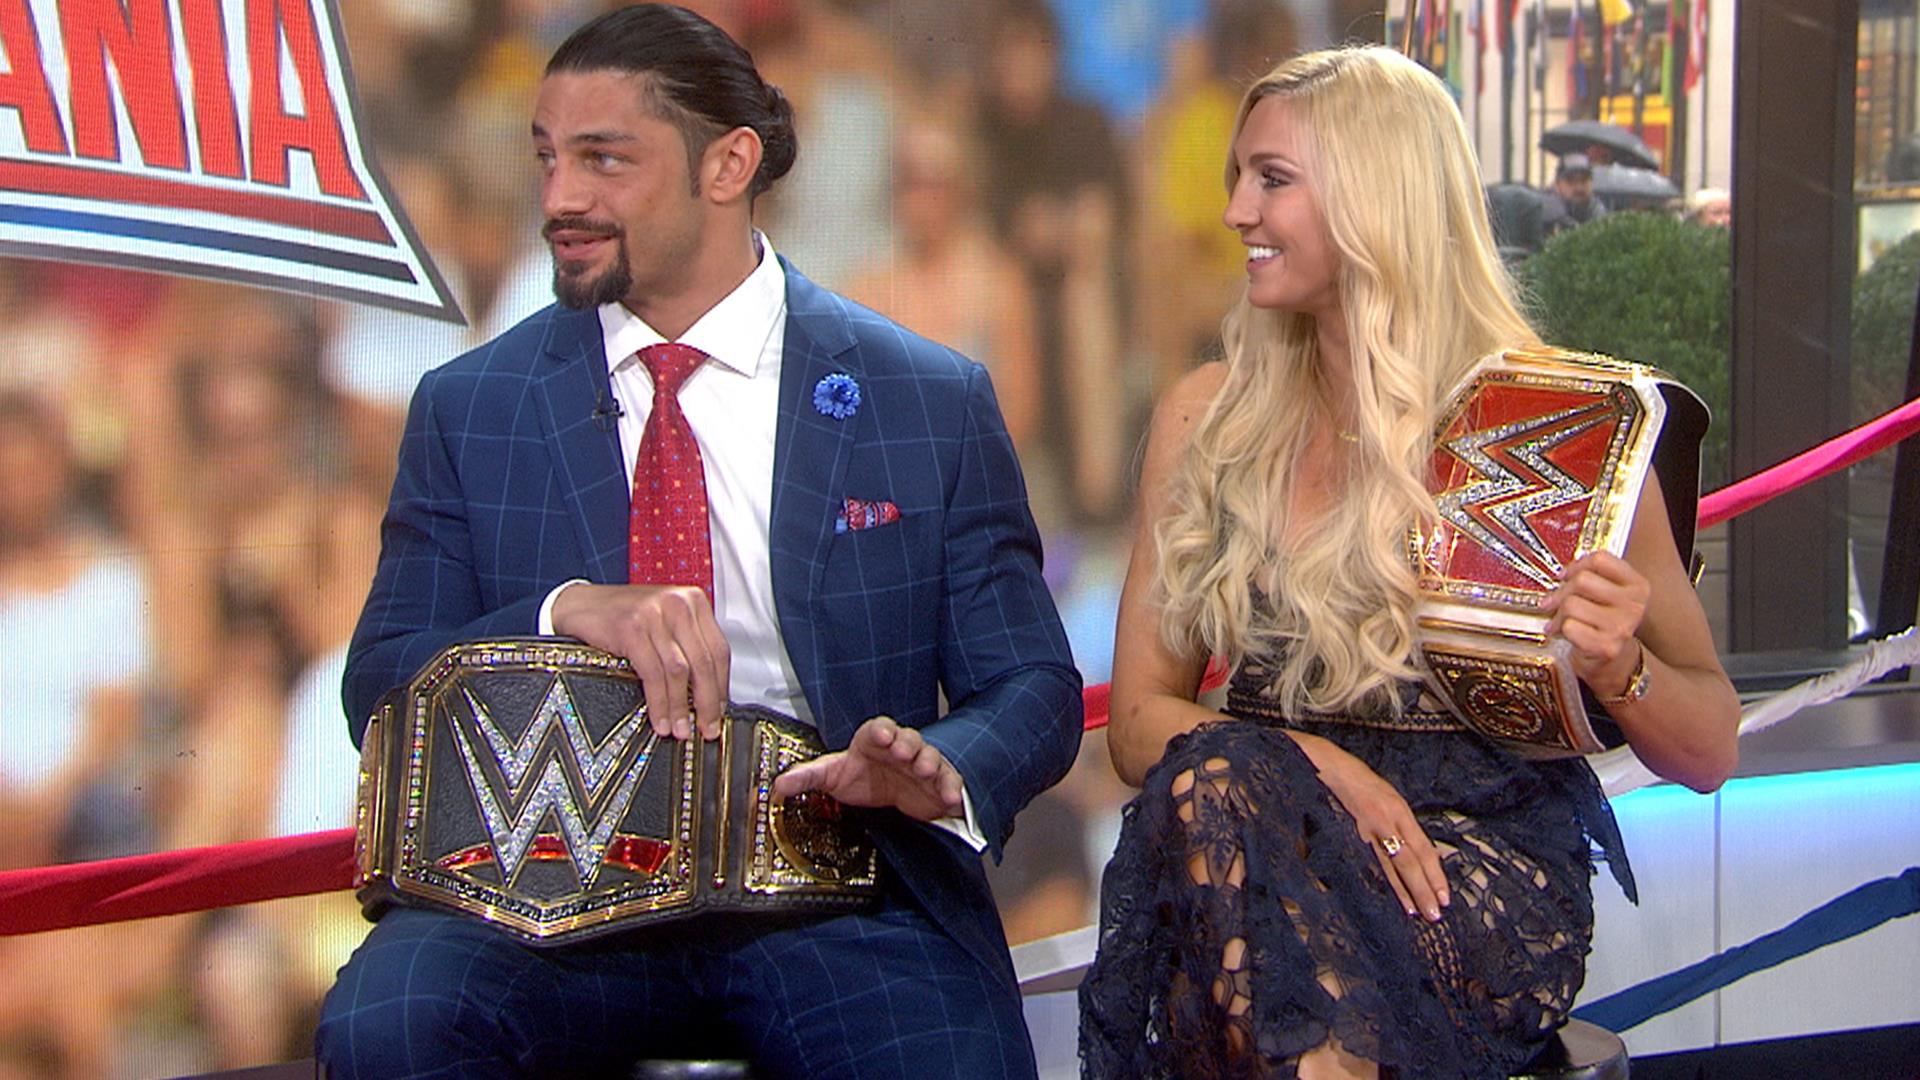 Meet the winners of Wrestlemania 32, Roman Reigns and Charlotte